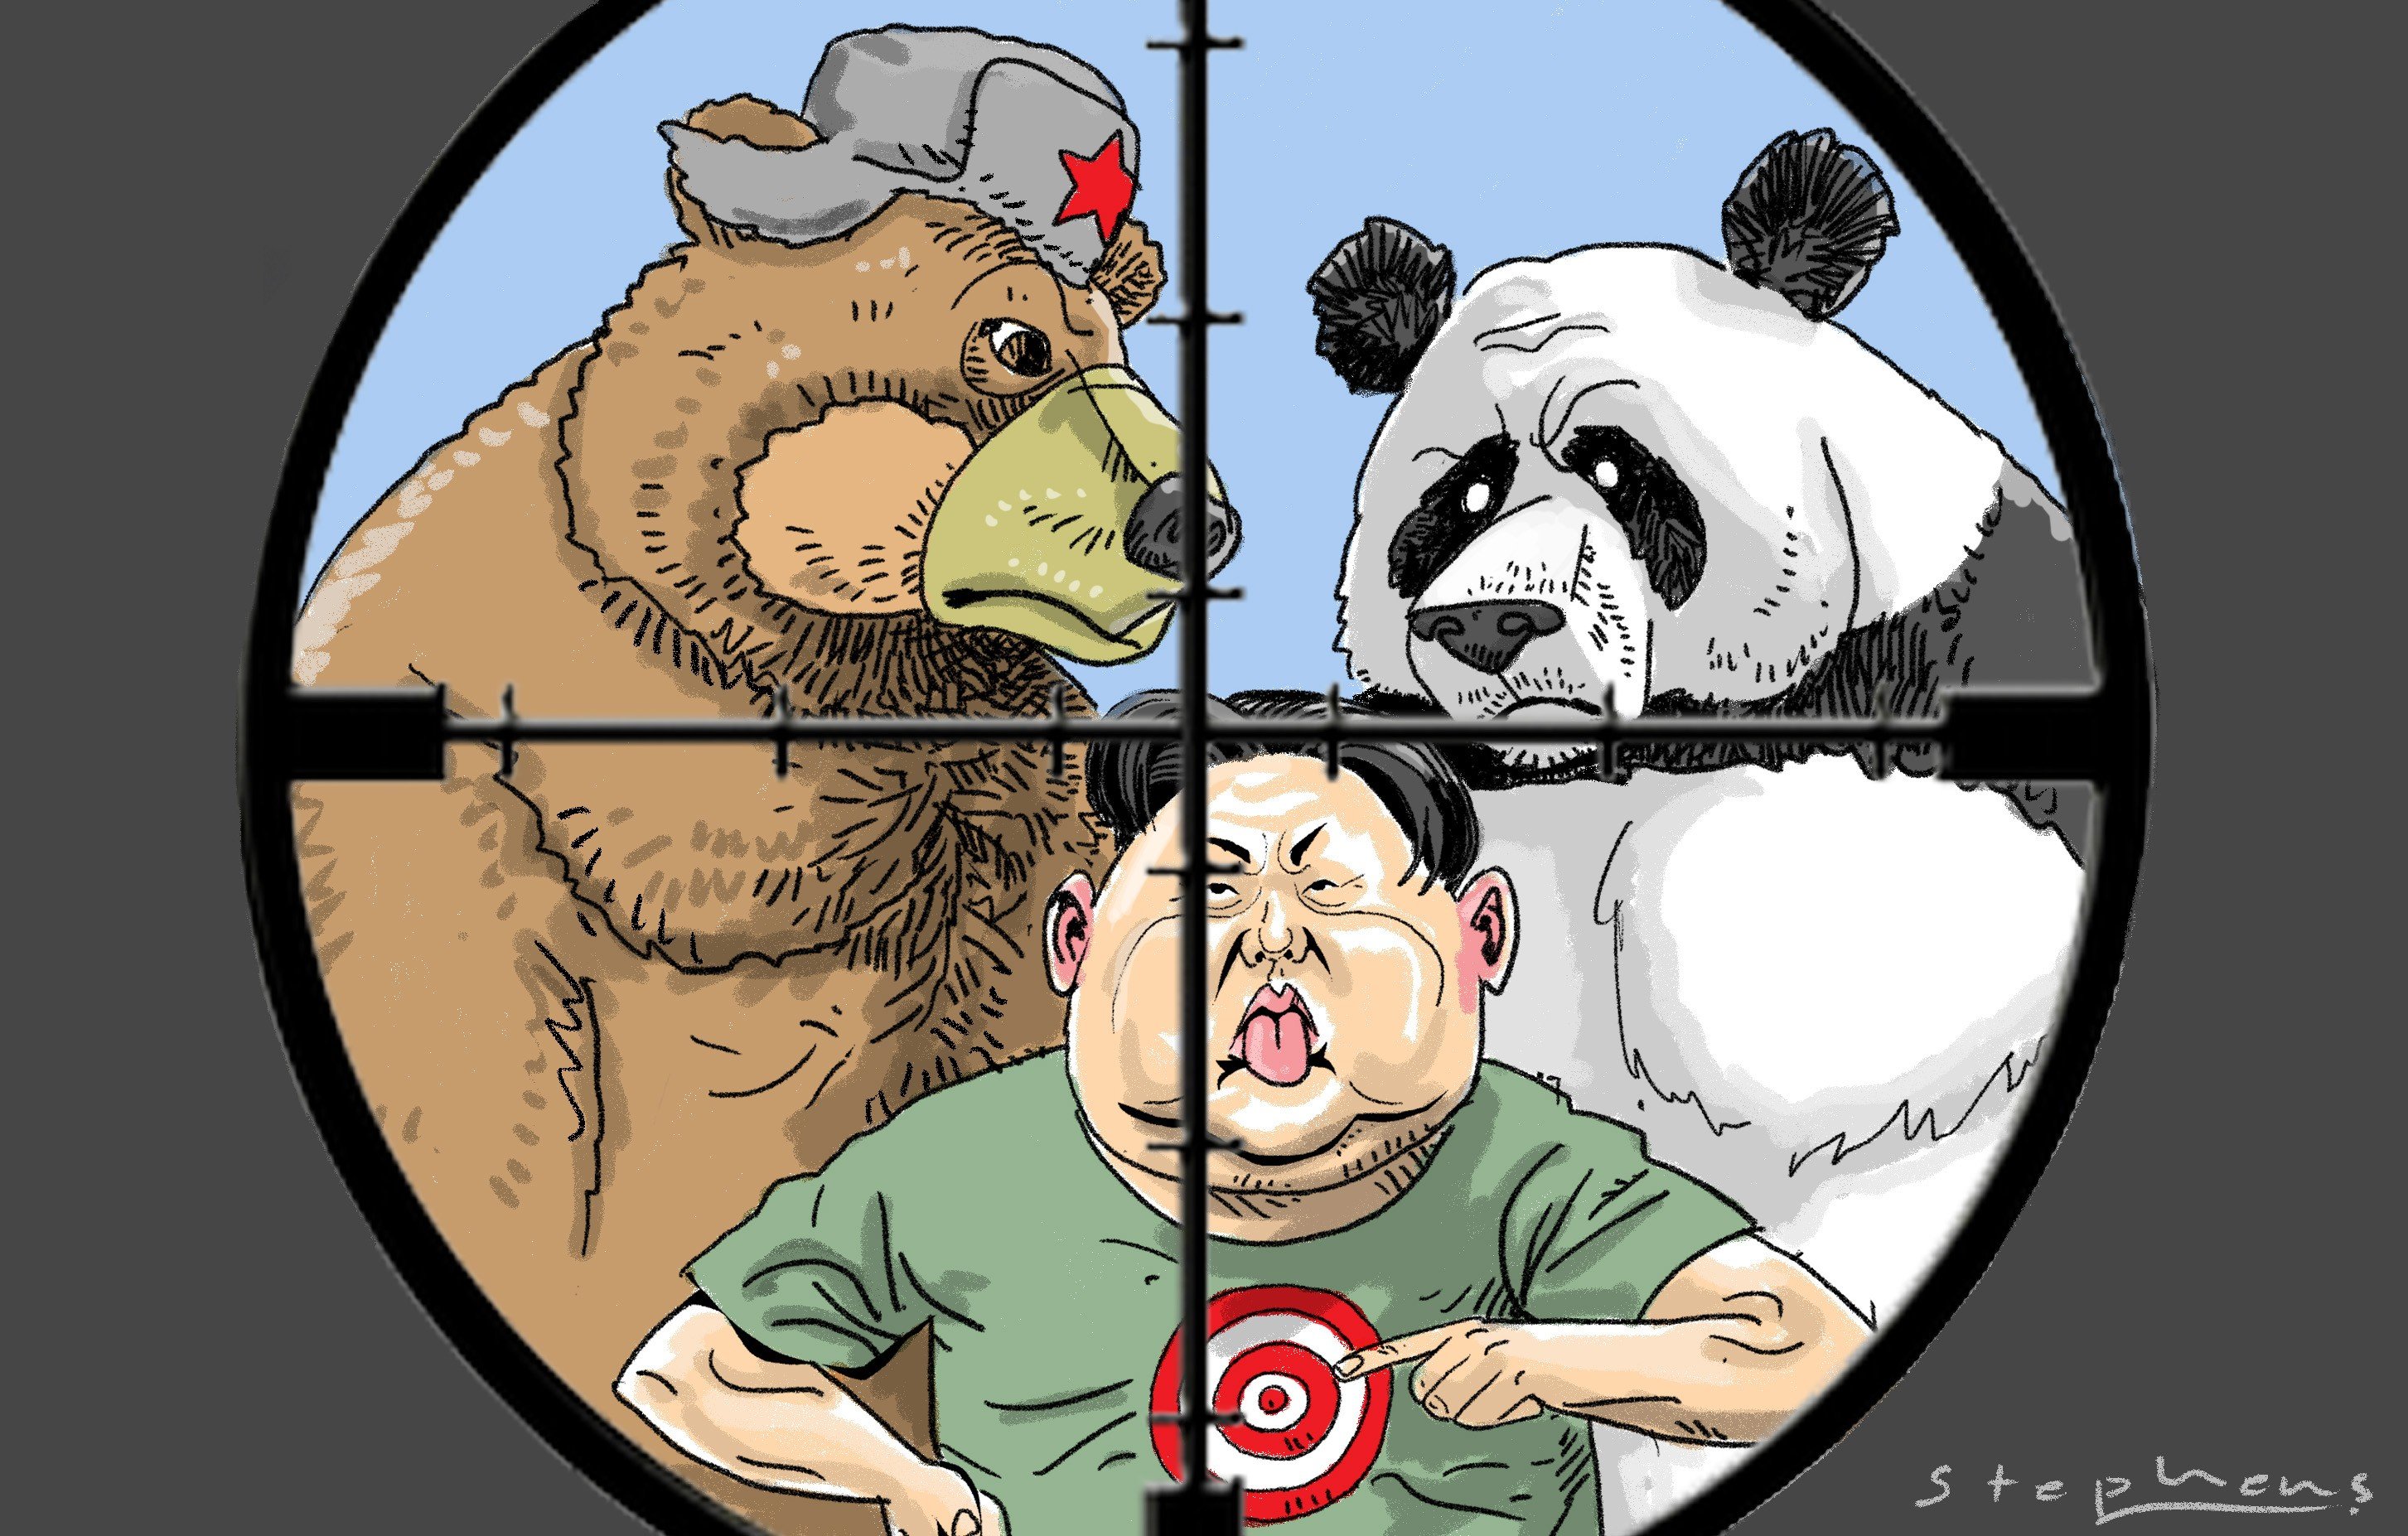 It may well be that Kim Jong-un has calculated two likely outcomes surrounding his fate: a long-term decline in the importance of Pyongyang to Beijing that leads to his demise, or a high-risk venture provoking the US into military intervention against North Korea. Illustration: Craig Stephens